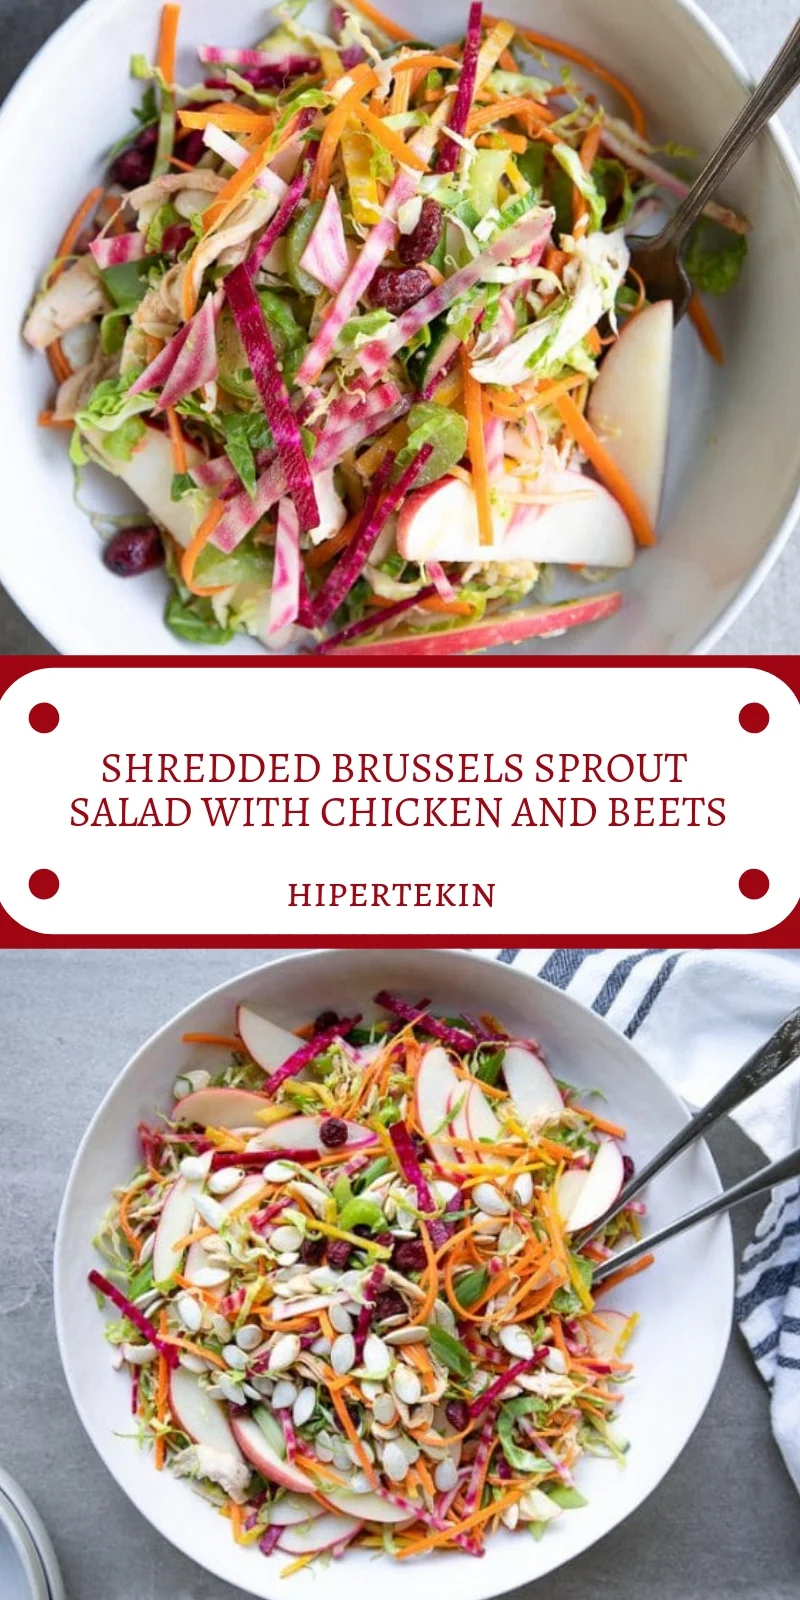 SHREDDED BRUSSELS SPROUT SALAD WITH CHICKEN AND BEETS